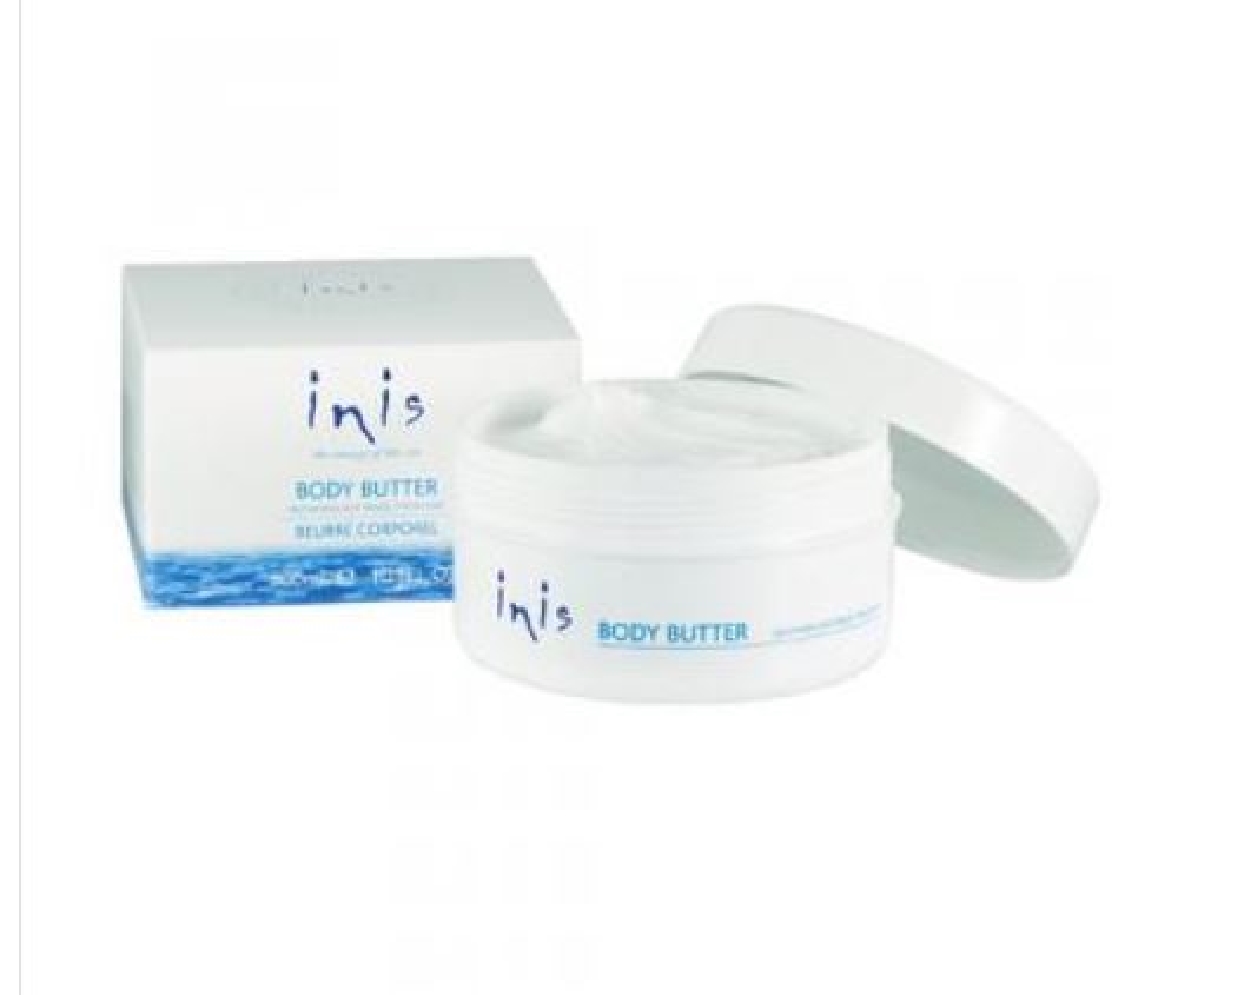 Inis the Energy of the Sea Body Butter 300ml

...